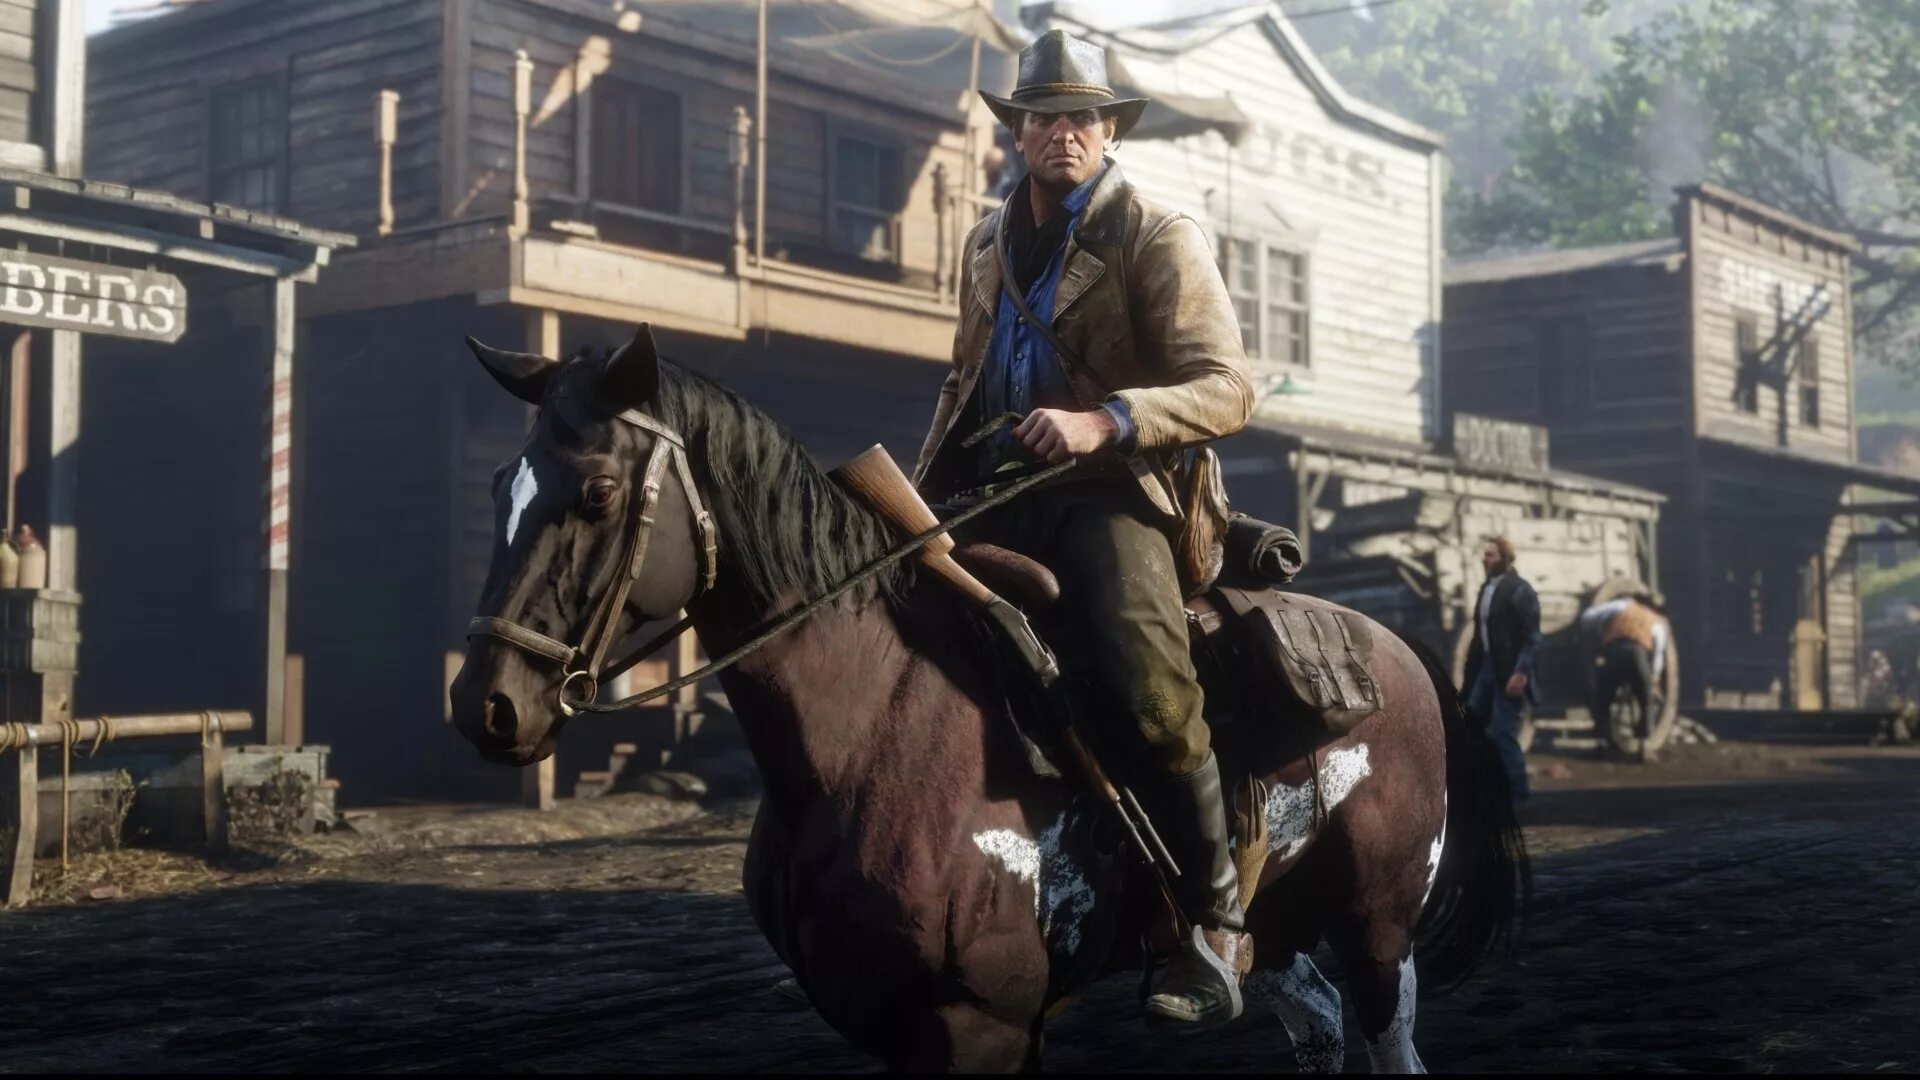 Red Dead Redemption 2. Xbox one Red Dead Redemption 2. Red Dead Redemption 2 Xbox. Red Dead Redemption 2 1. Red dead redemption series